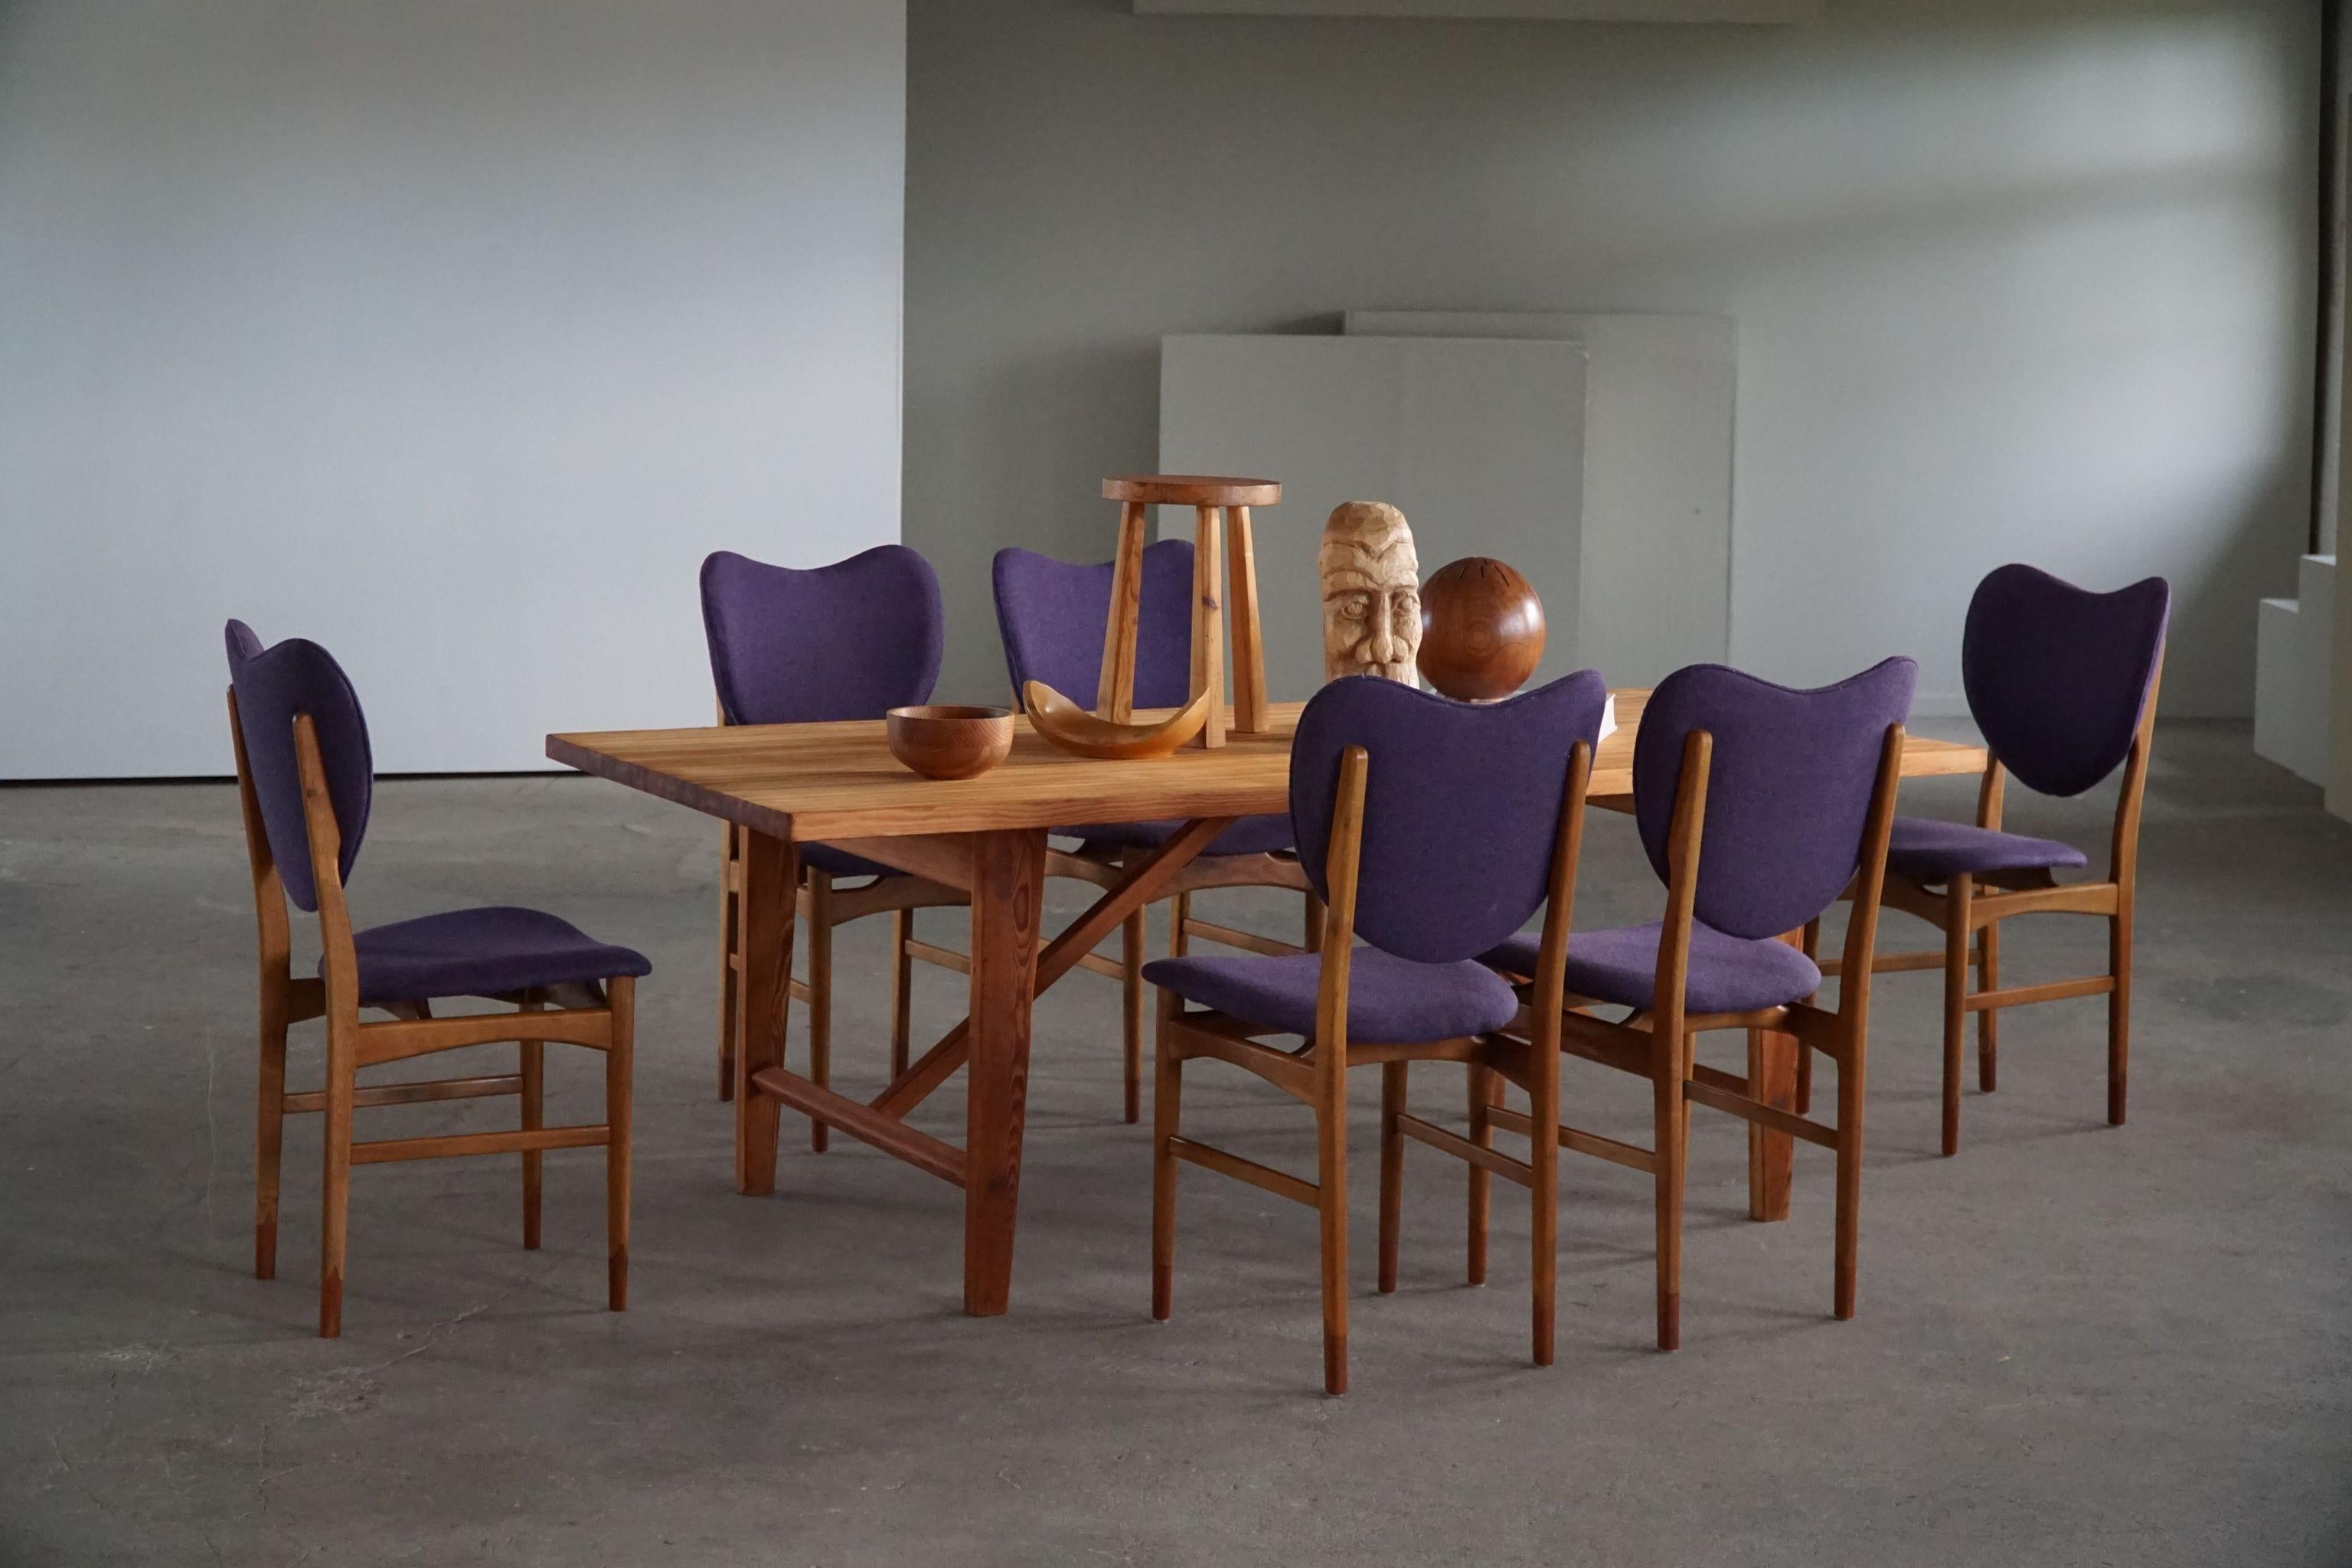 An extraordinary set of 6 dining chairs in oak, with highlighted details such as the fine feets made in teak. Seats and the curved back with original upholstery in a great quality hallingdal 65 wool from Kvadrat, designed by Nanna Ditzel. 

The